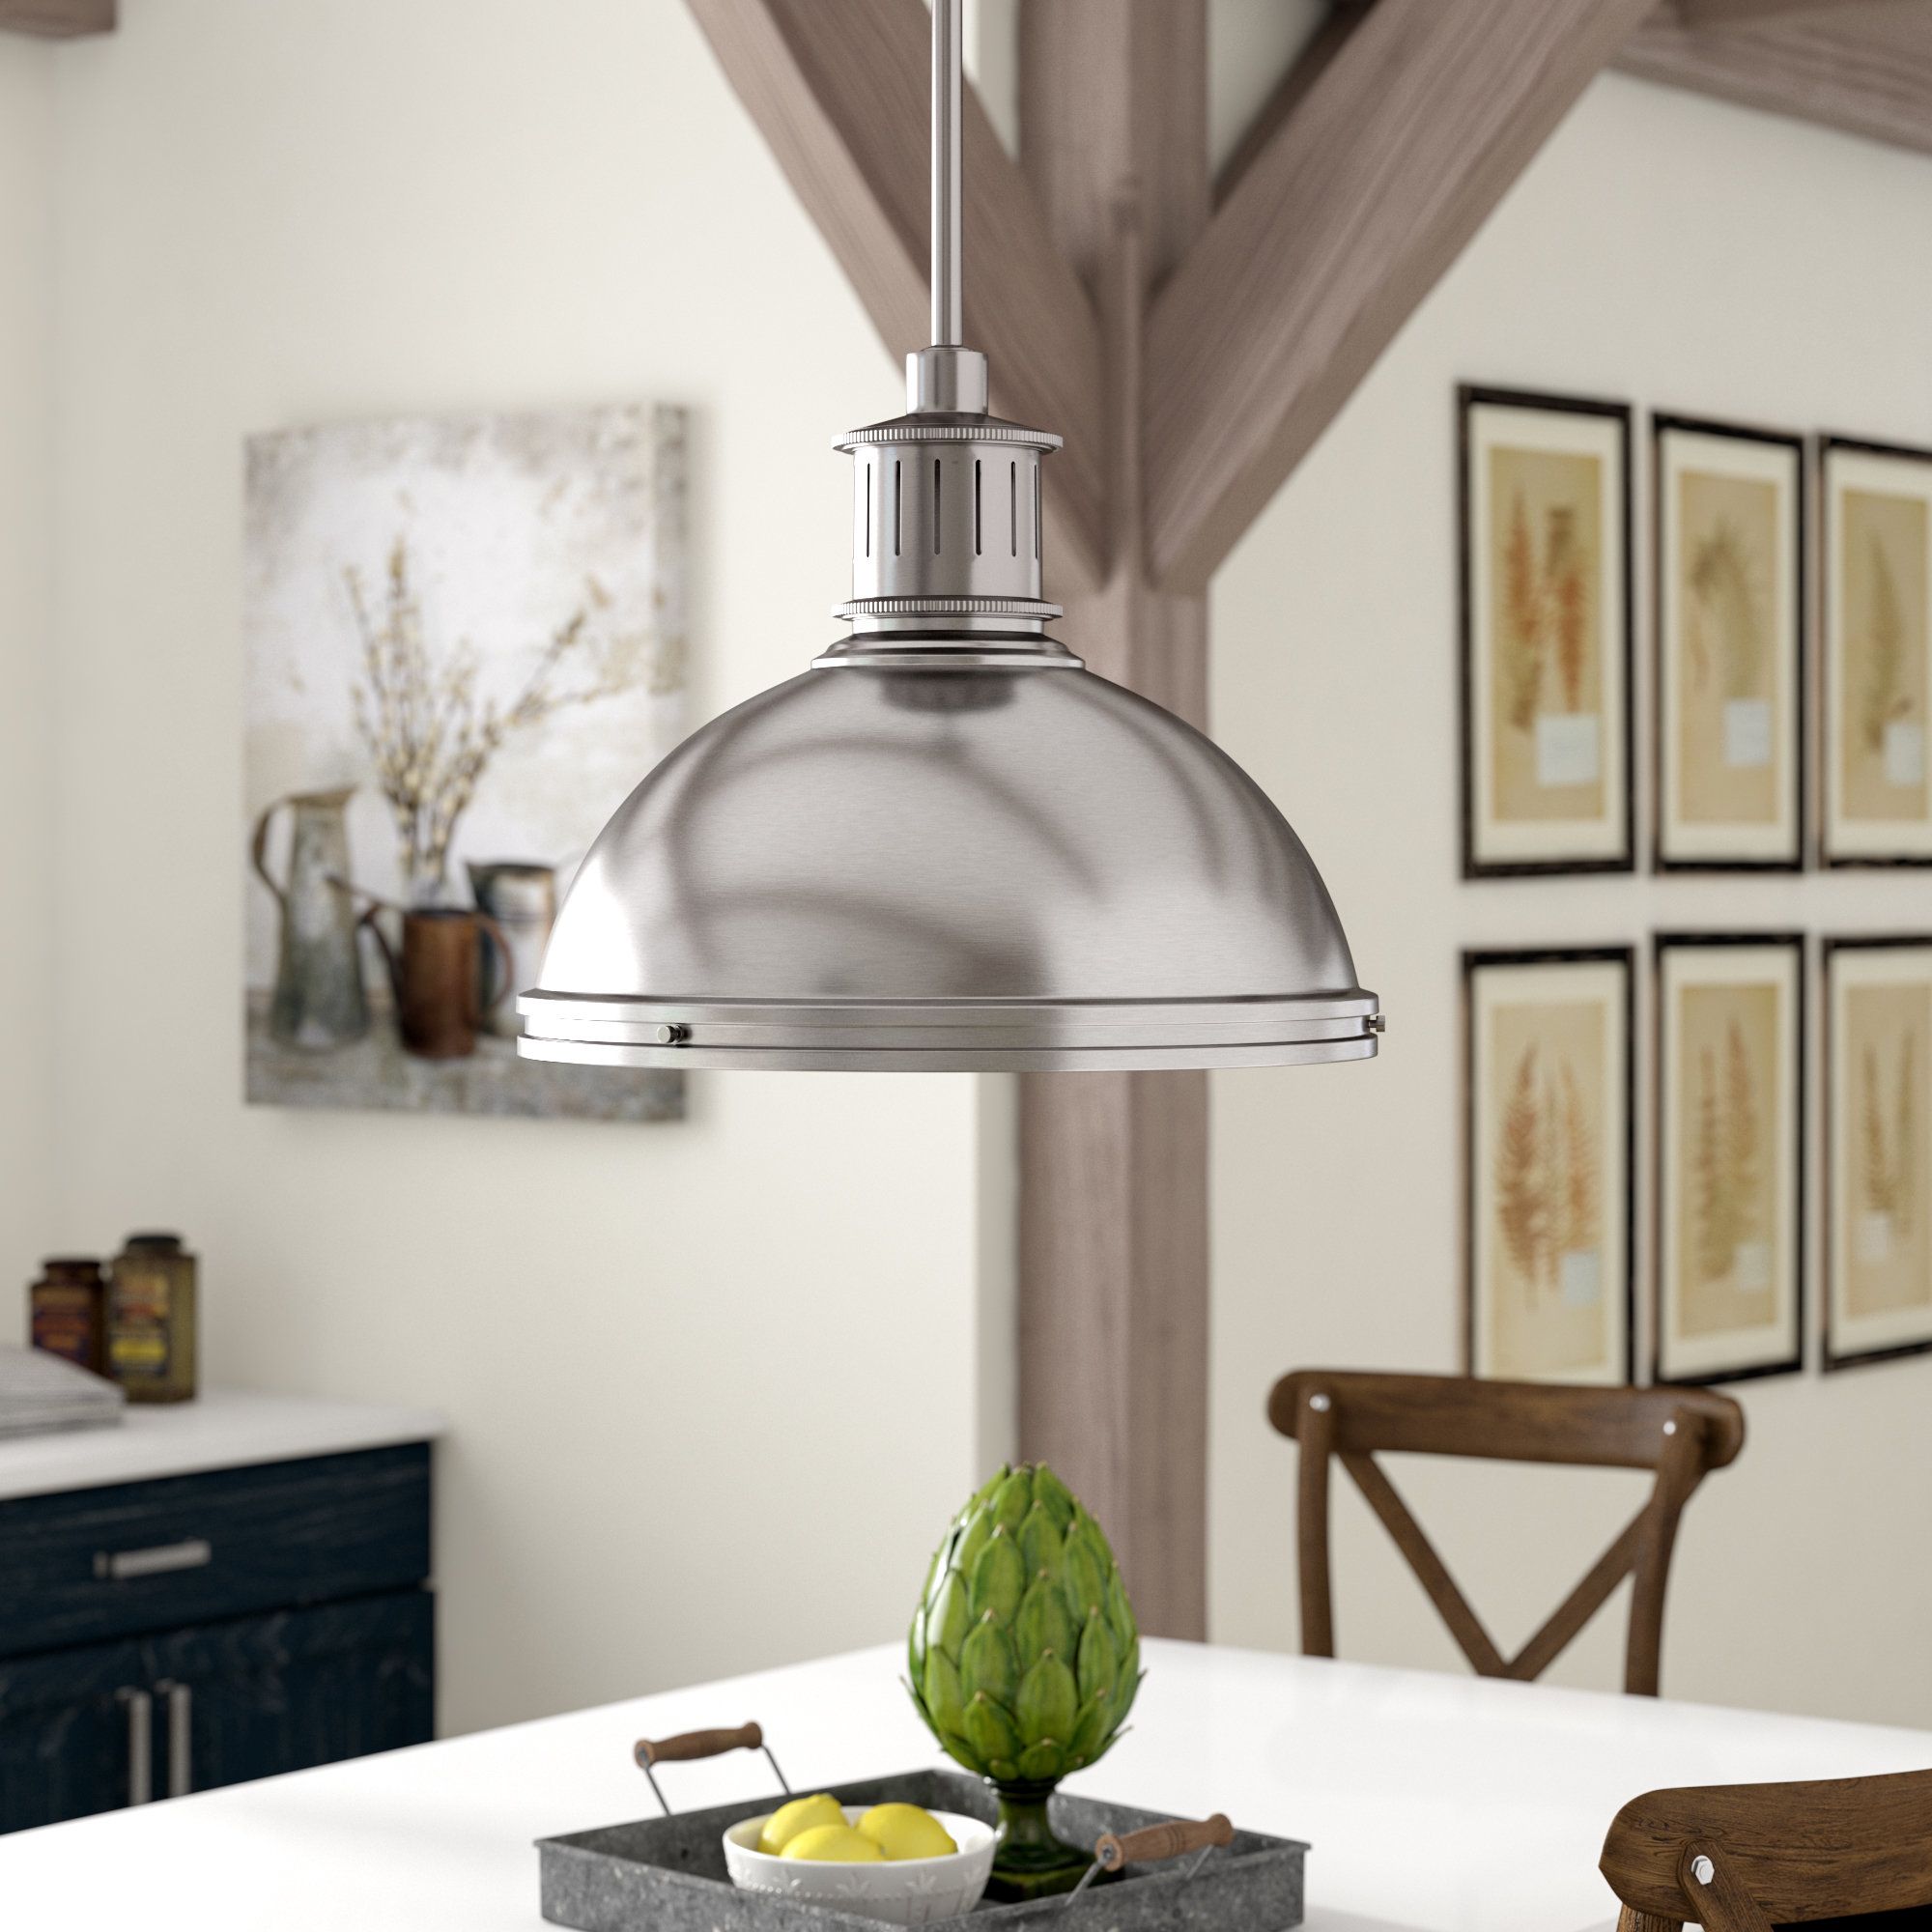 Orchard Hill 1 Light Led Dome Pendant Within Recent Amara 3 Light Dome Pendants (View 17 of 25)